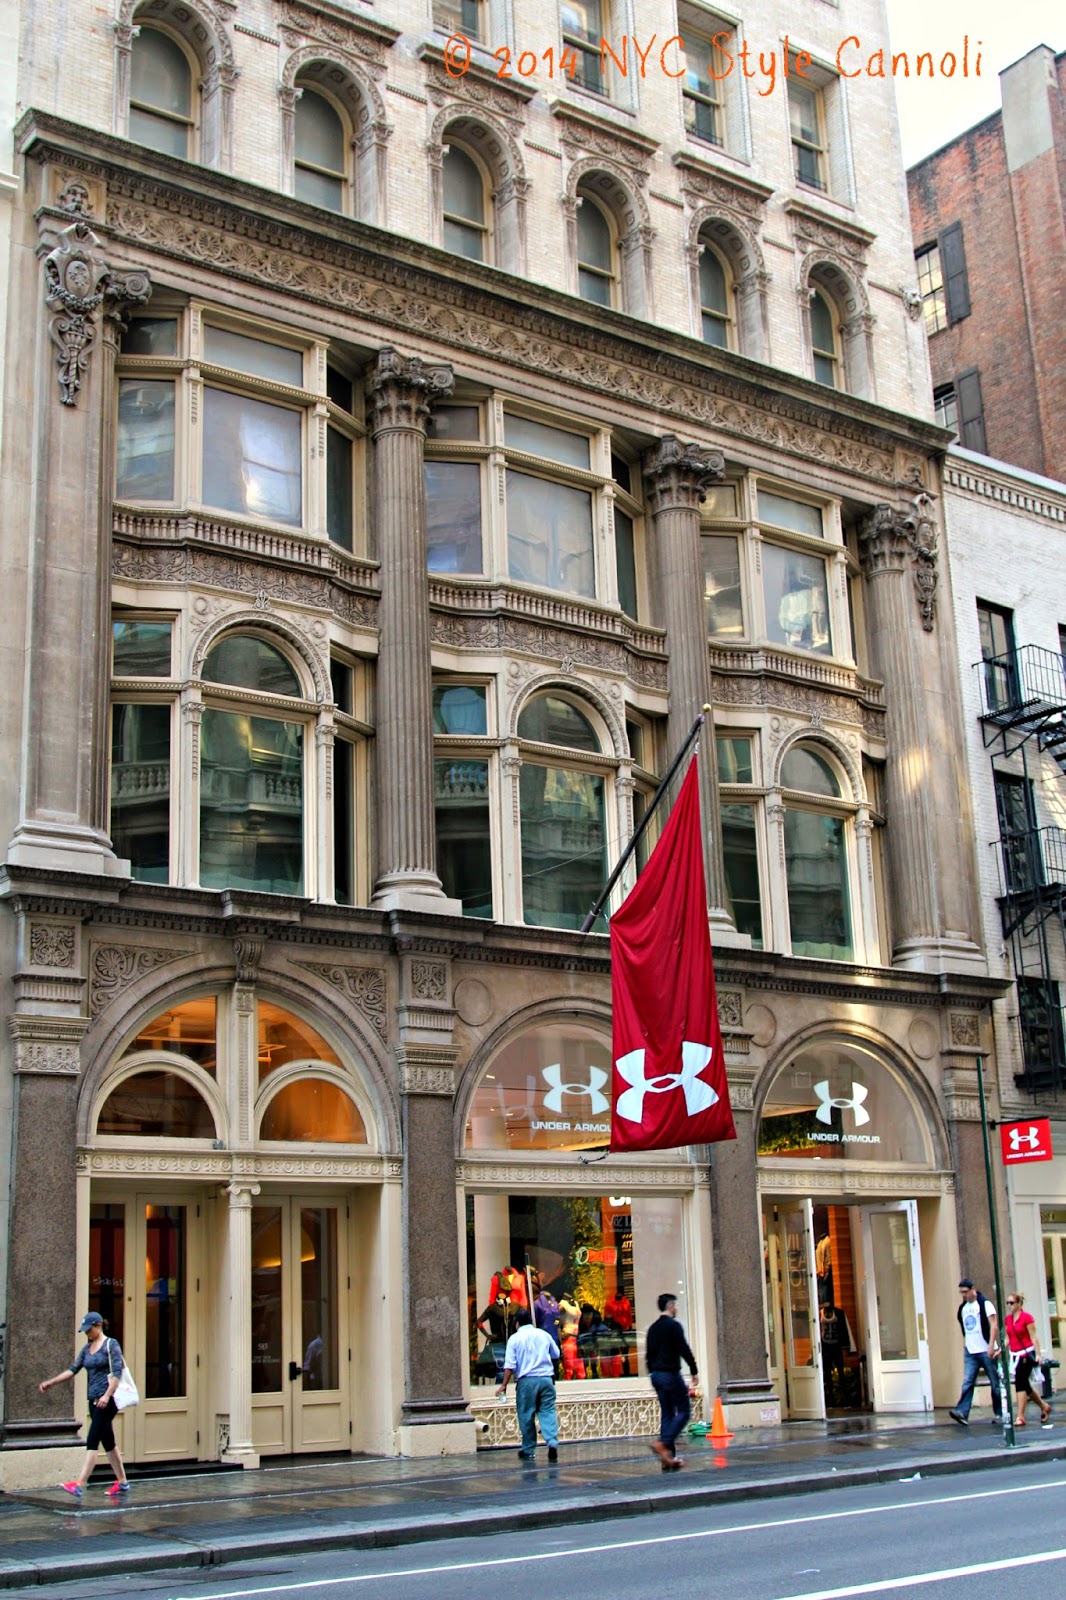 The Architecture of Soho New York City | NYC, Style & a little Cannoli